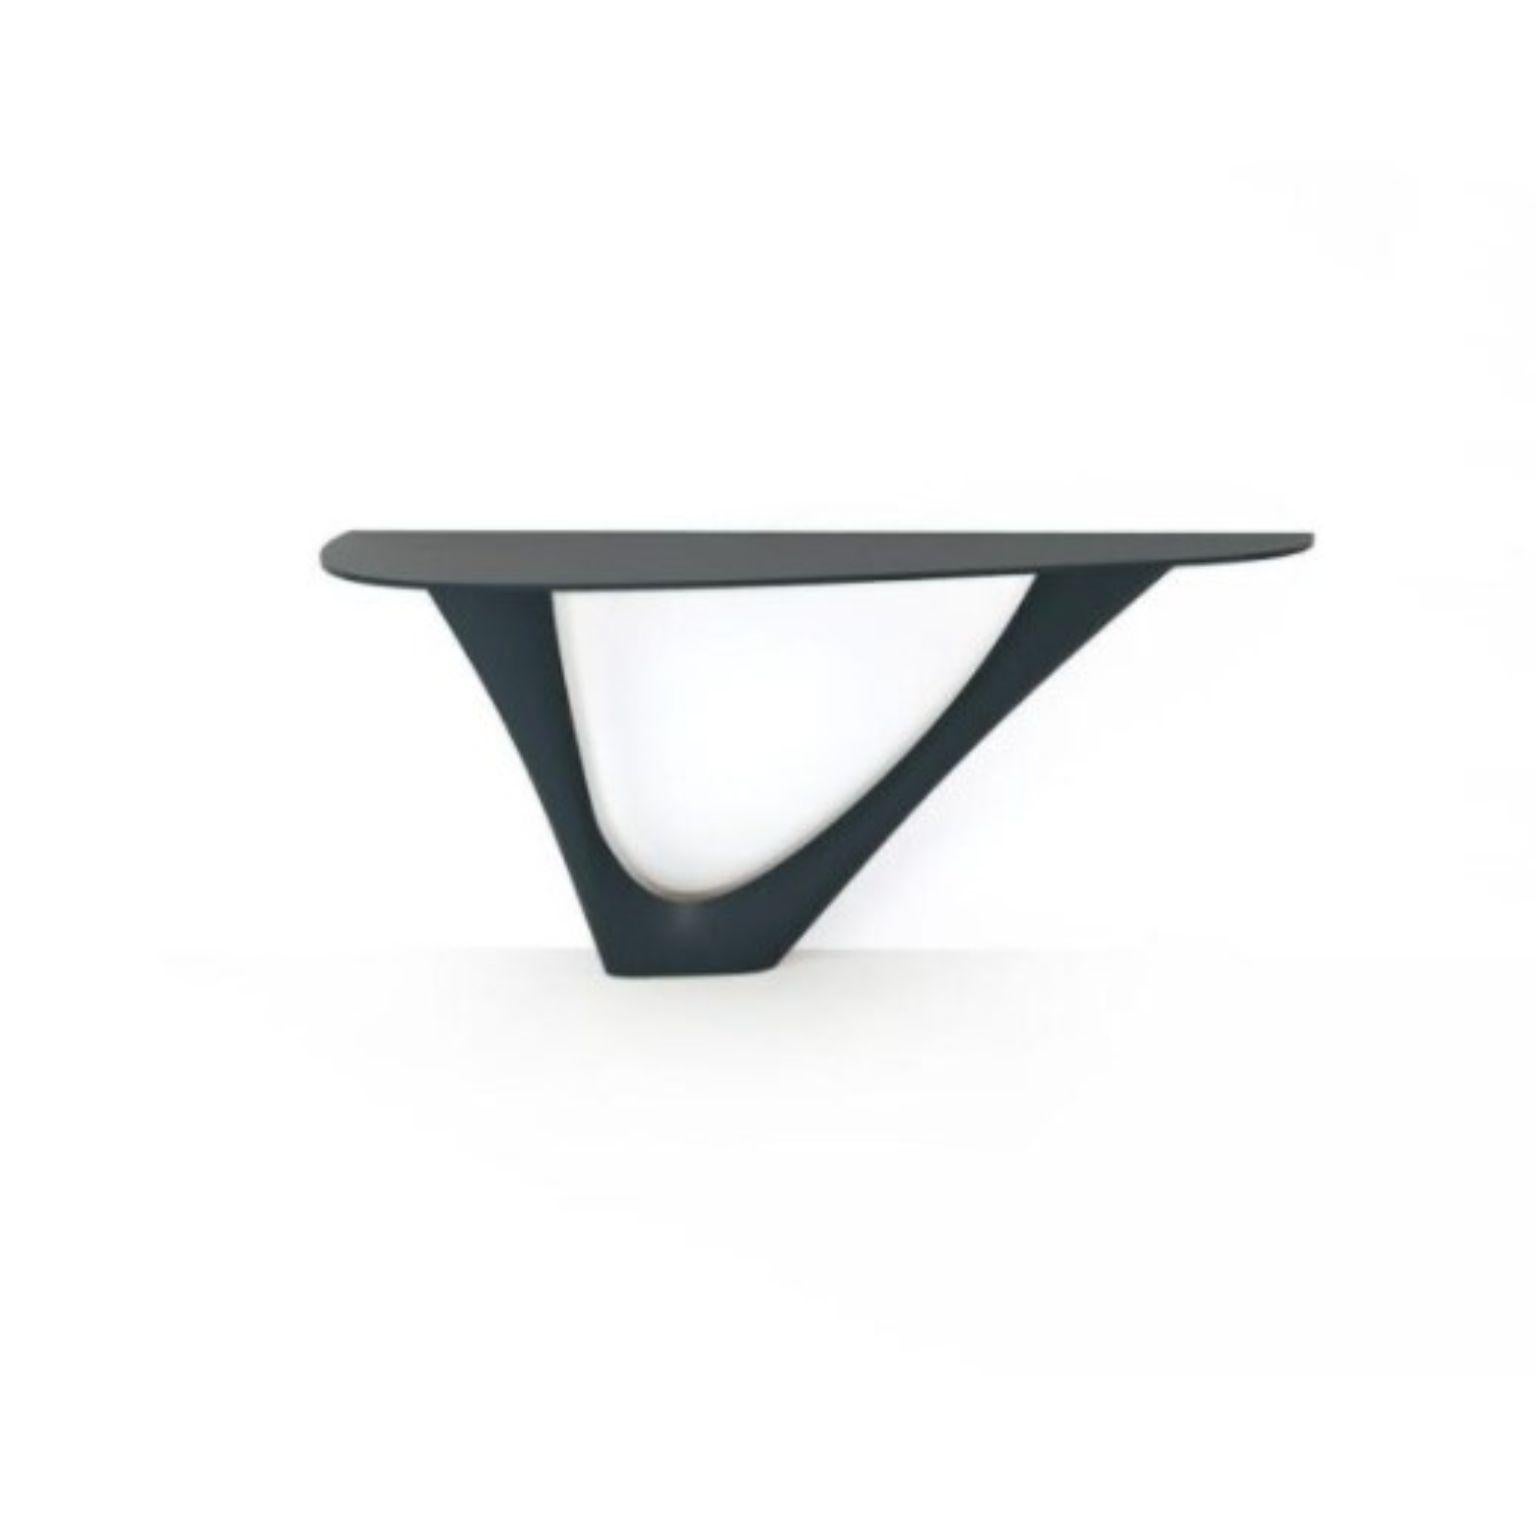 Grey blue g-console steel base with steel top Mono by Zieta
Dimensions: D 43 x W 159 x H 75 cm 
Material: Carbon steel. 
Also available in different colors and dimensions.

G-Console is another bionic object in our collection. Created for smaller